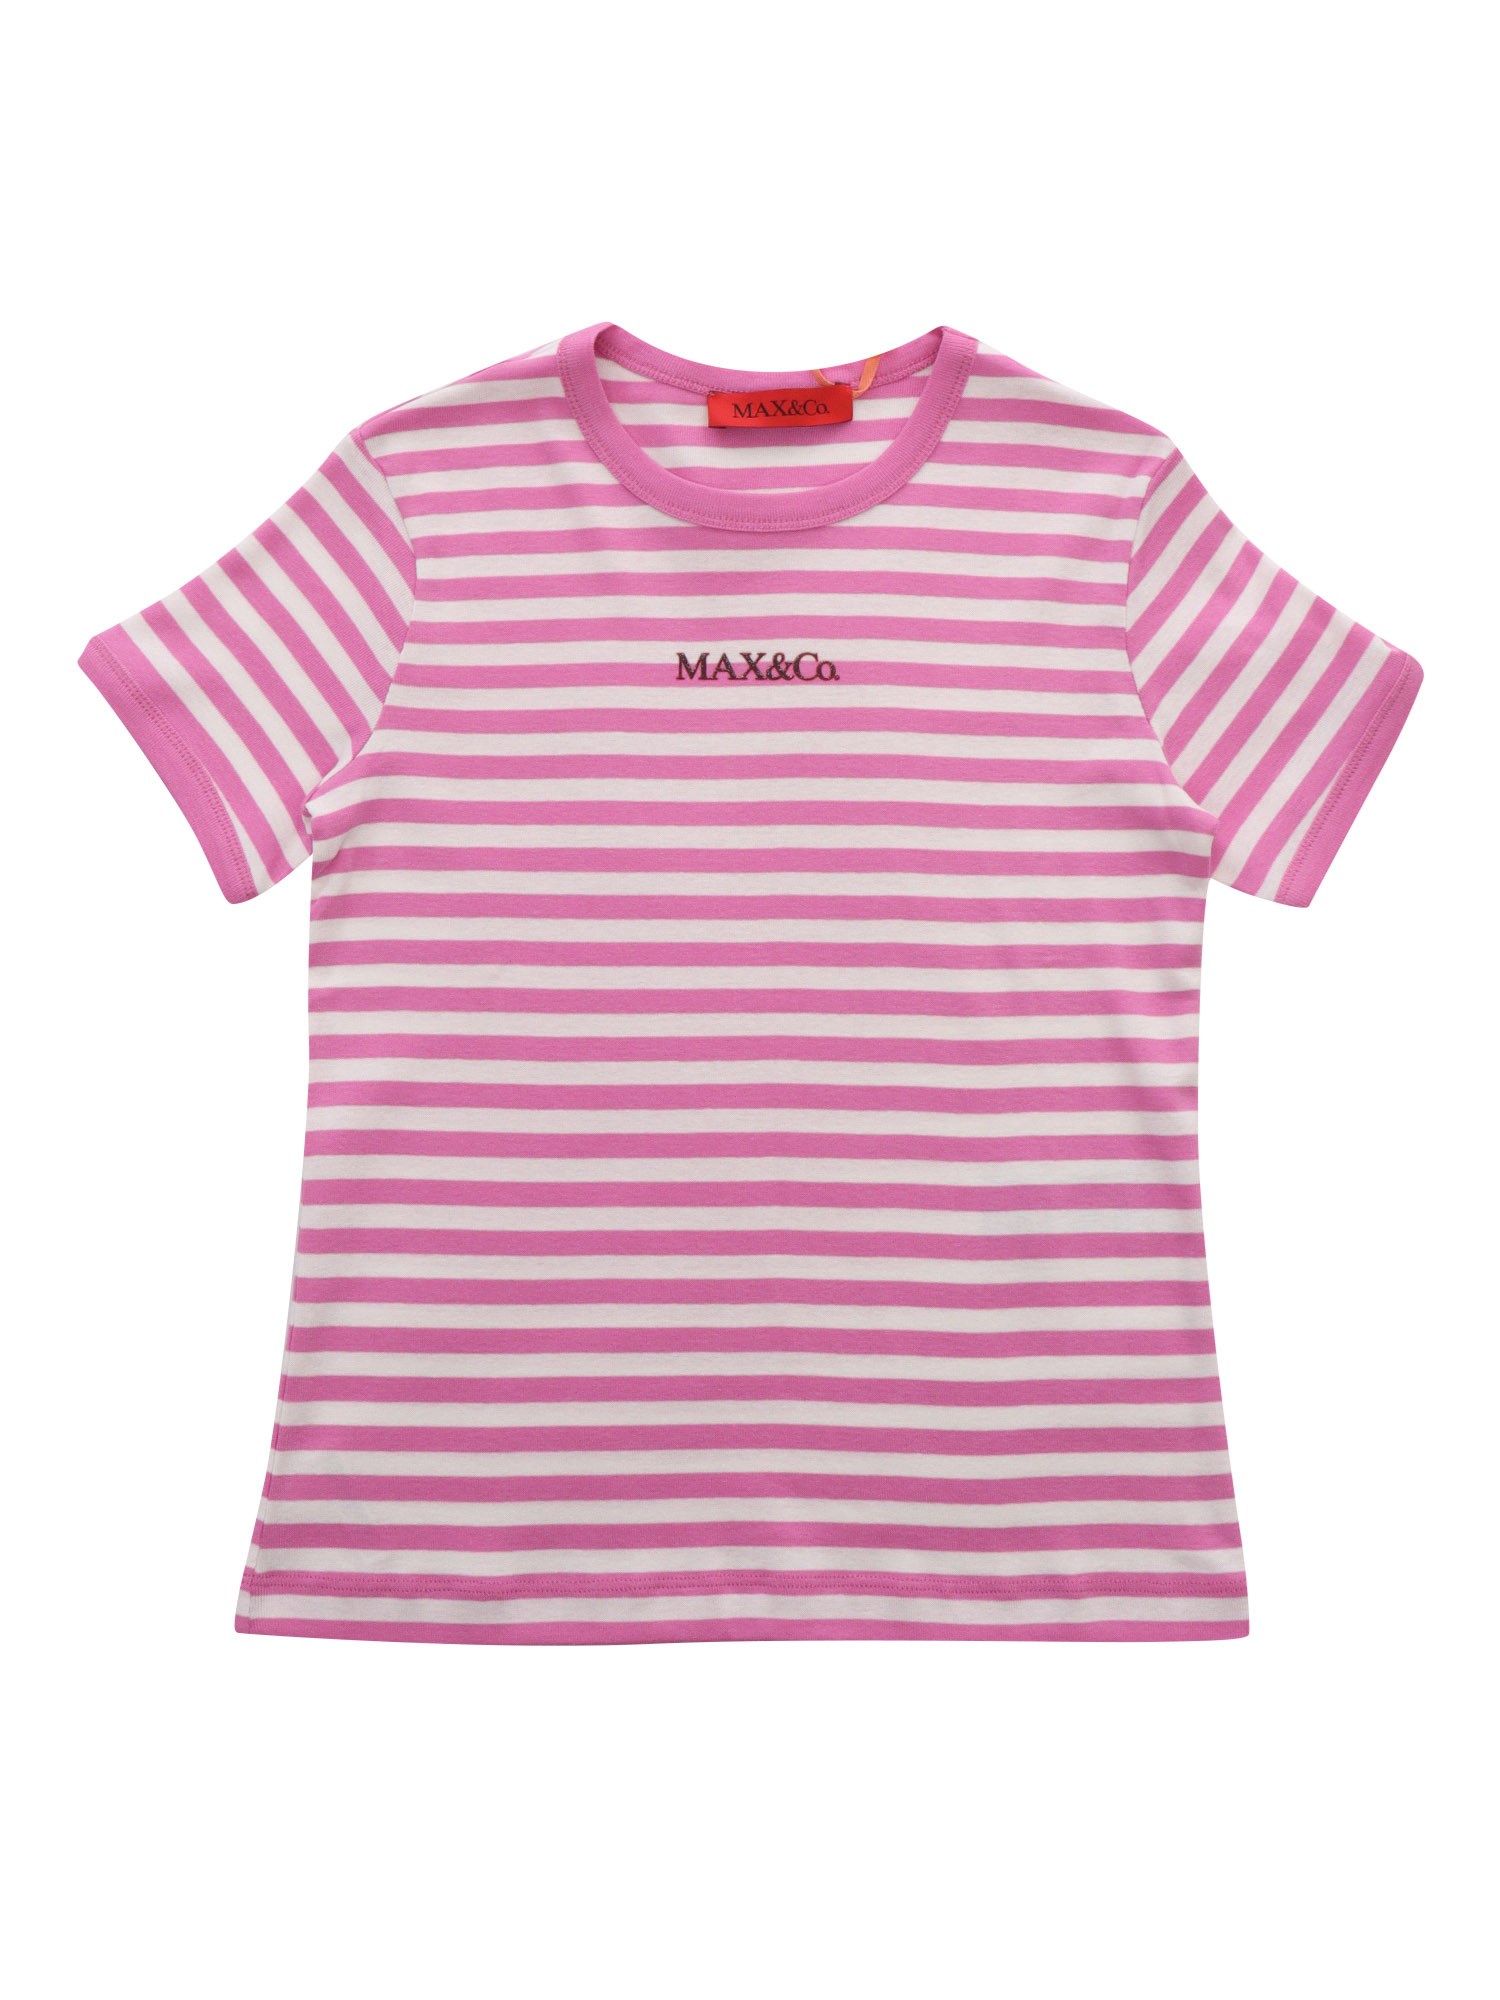 Max & Co Pink Striped T-shirt